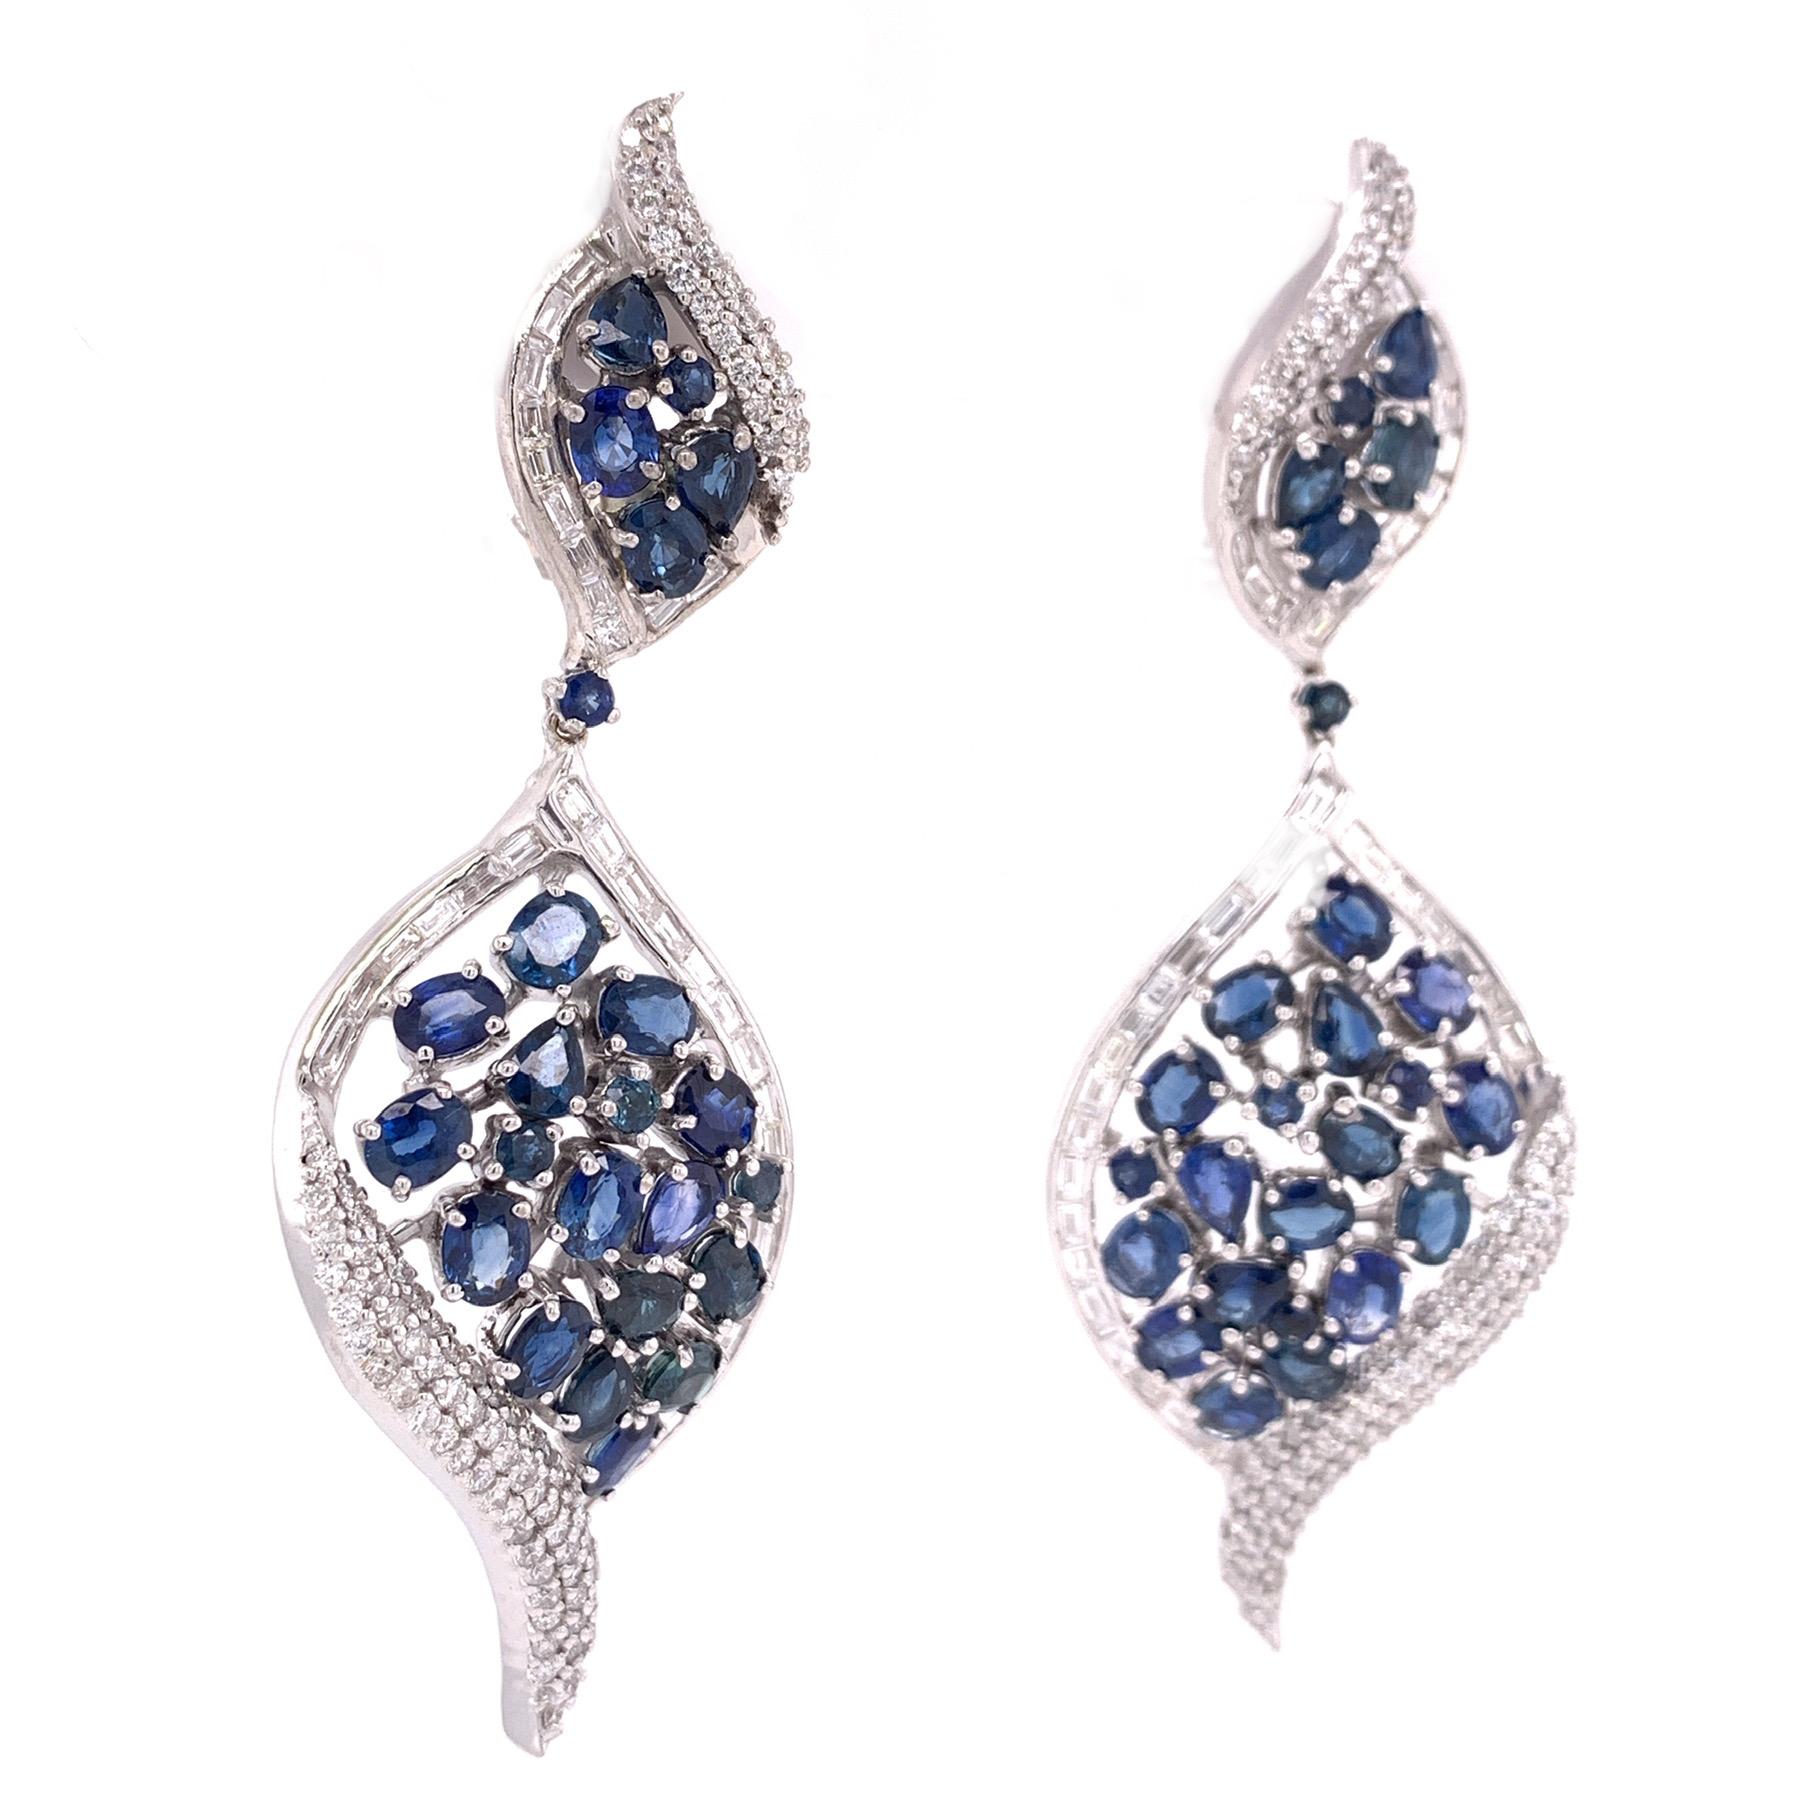 Midnight Blue Collection

Multi shape Blue Sapphire and Diamond baguette and pavé chandelier earrings set in 18K white gold.

Blue Sapphire: 8.54ct total weight.
Diamonds: 2.47ct total weight.
All diamonds are G-H/SI stones.